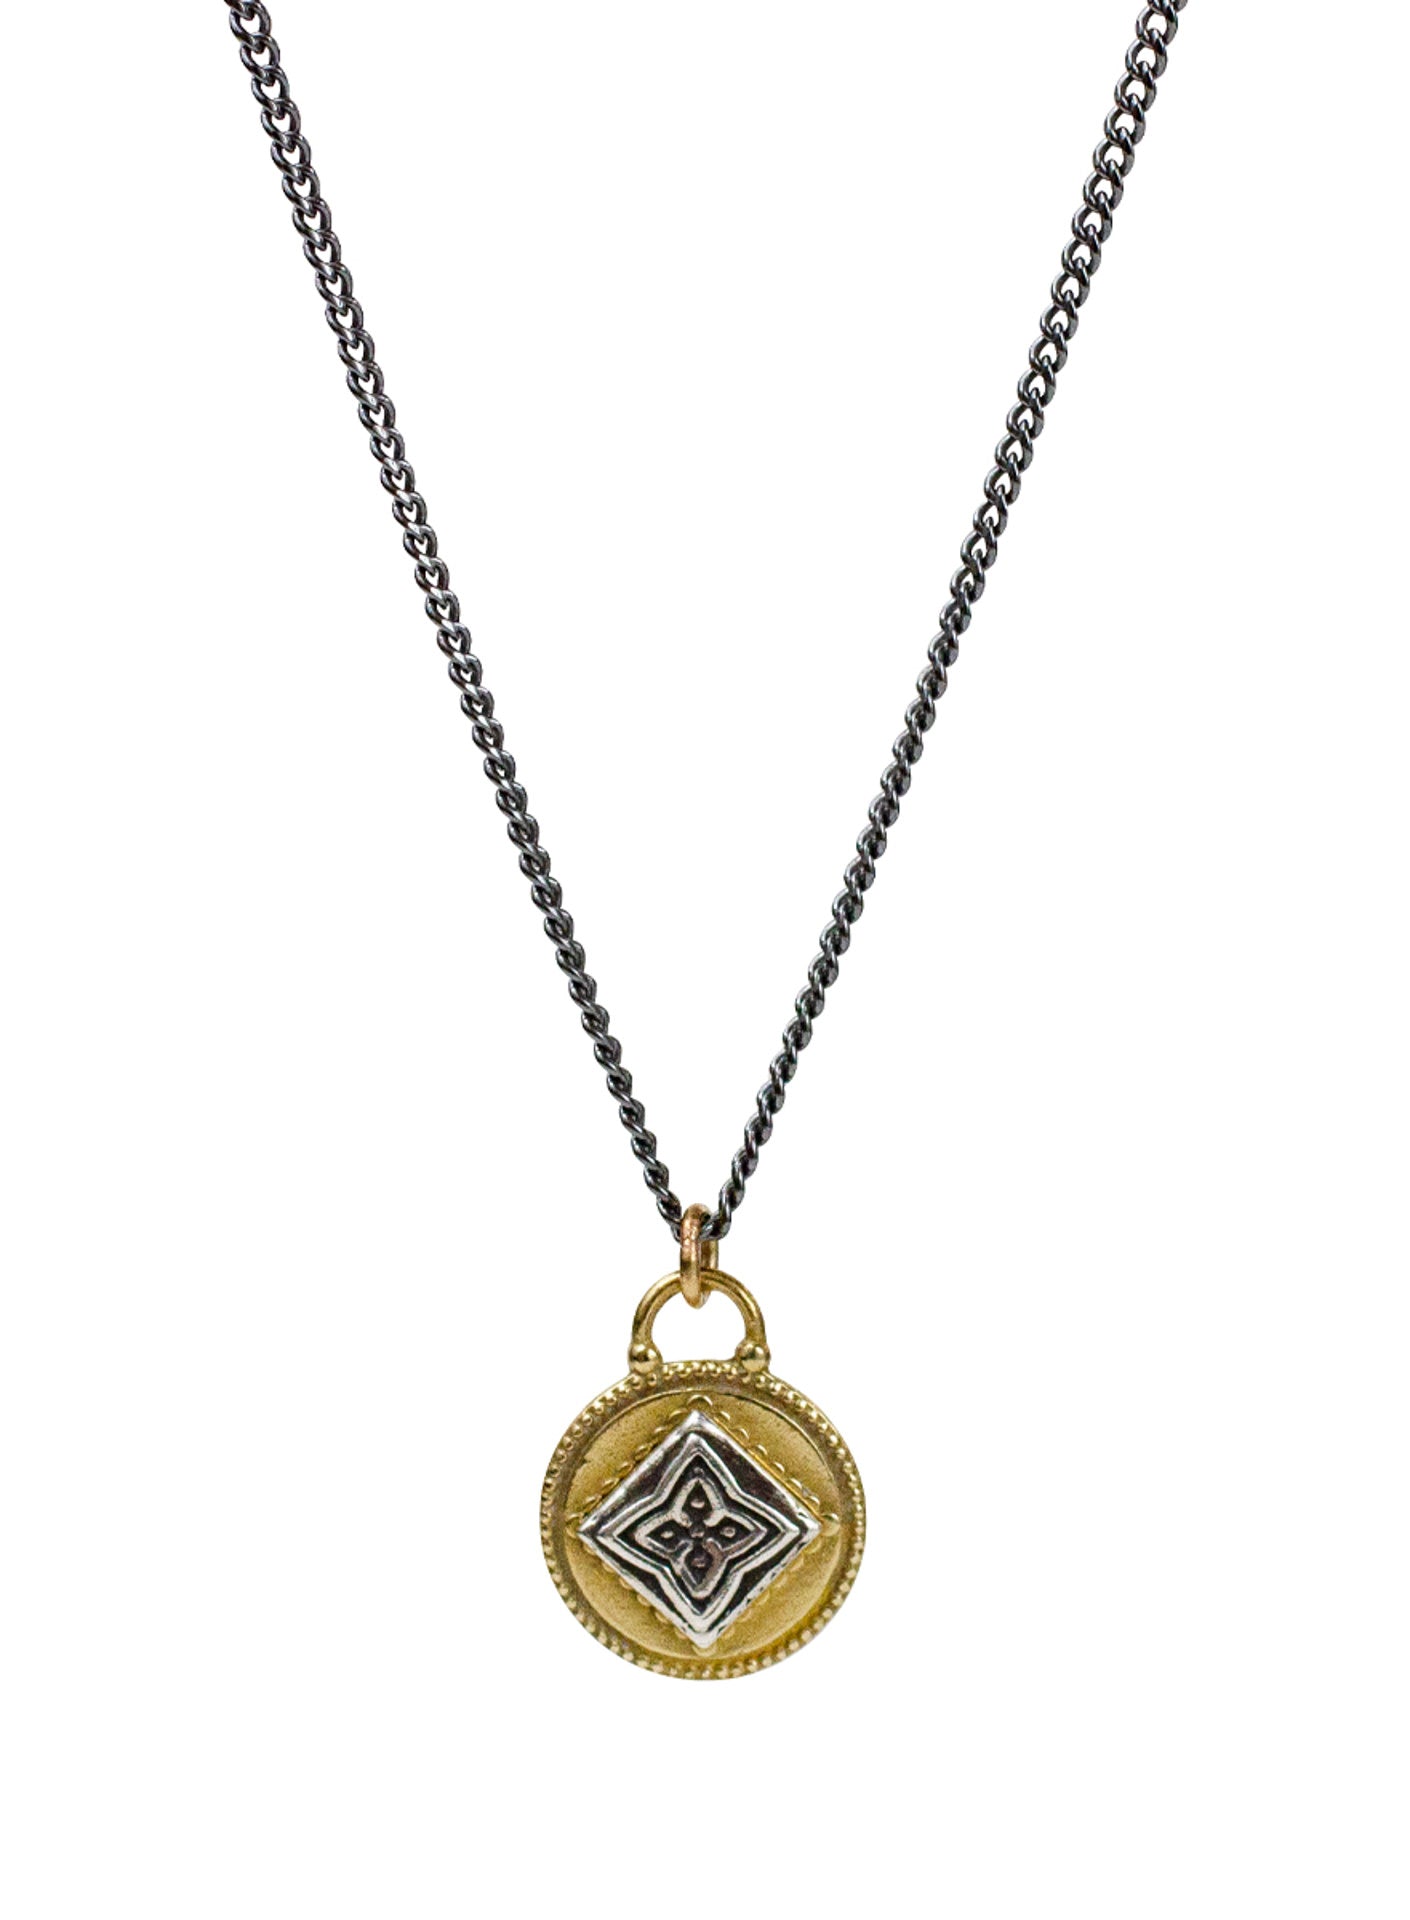 Manifest Necklace - Siddha "raise your frequency"